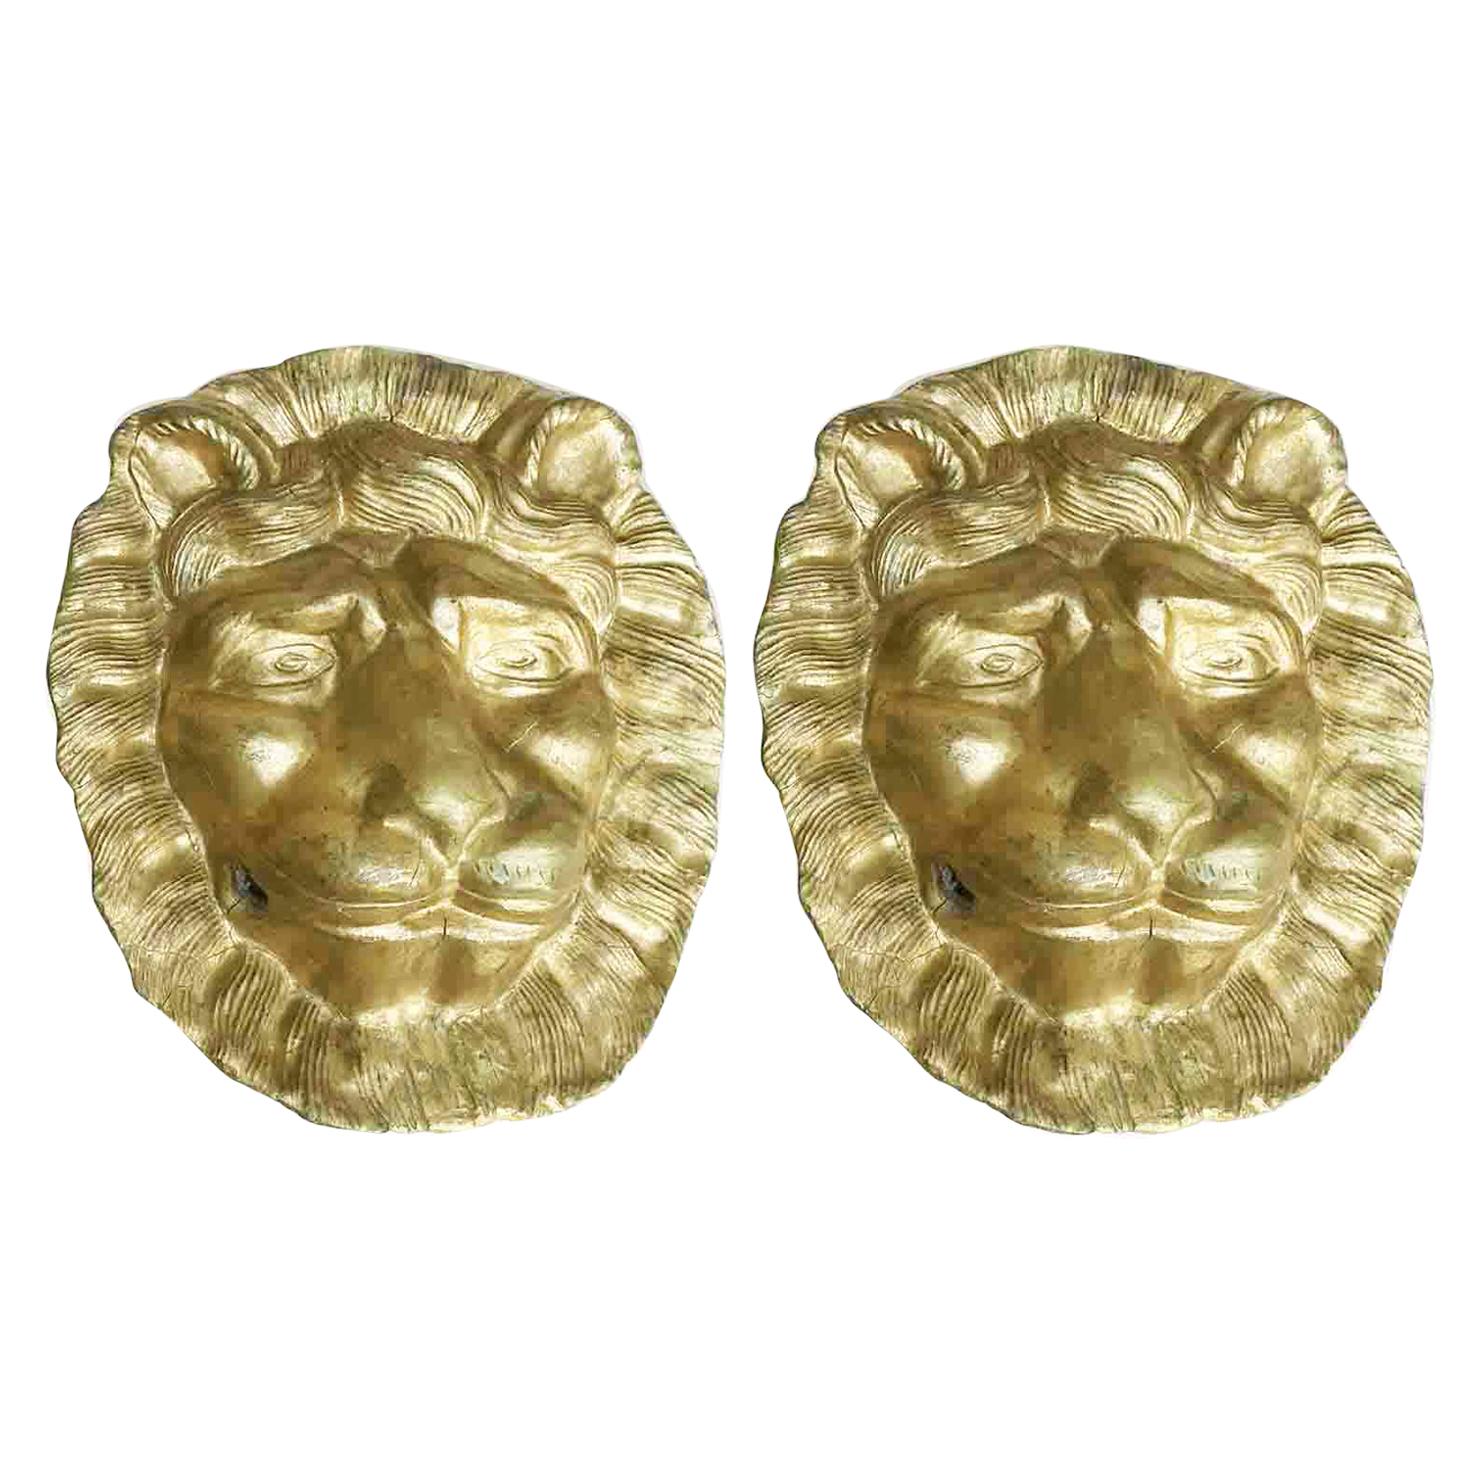 Mid-19th Century Pair of Italian Masks Gilded Lion Head Sculptures from Tuscany